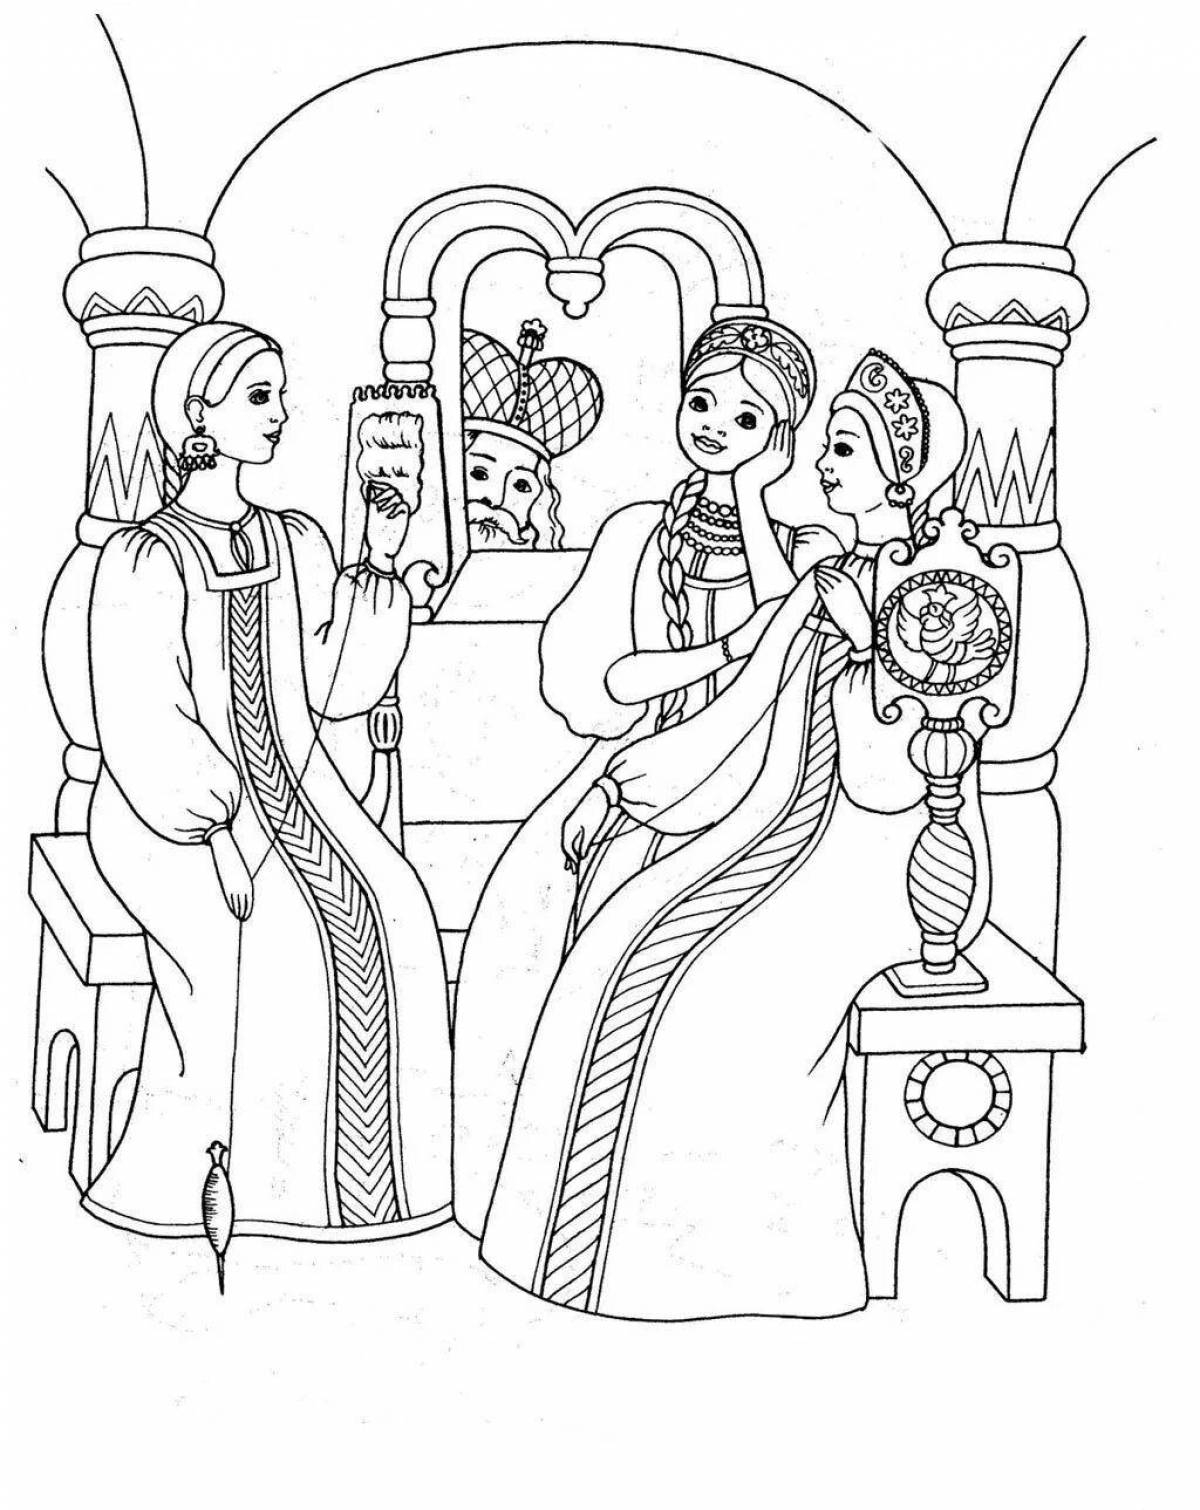 Cute coloring book based on Pushkin's fairy tales